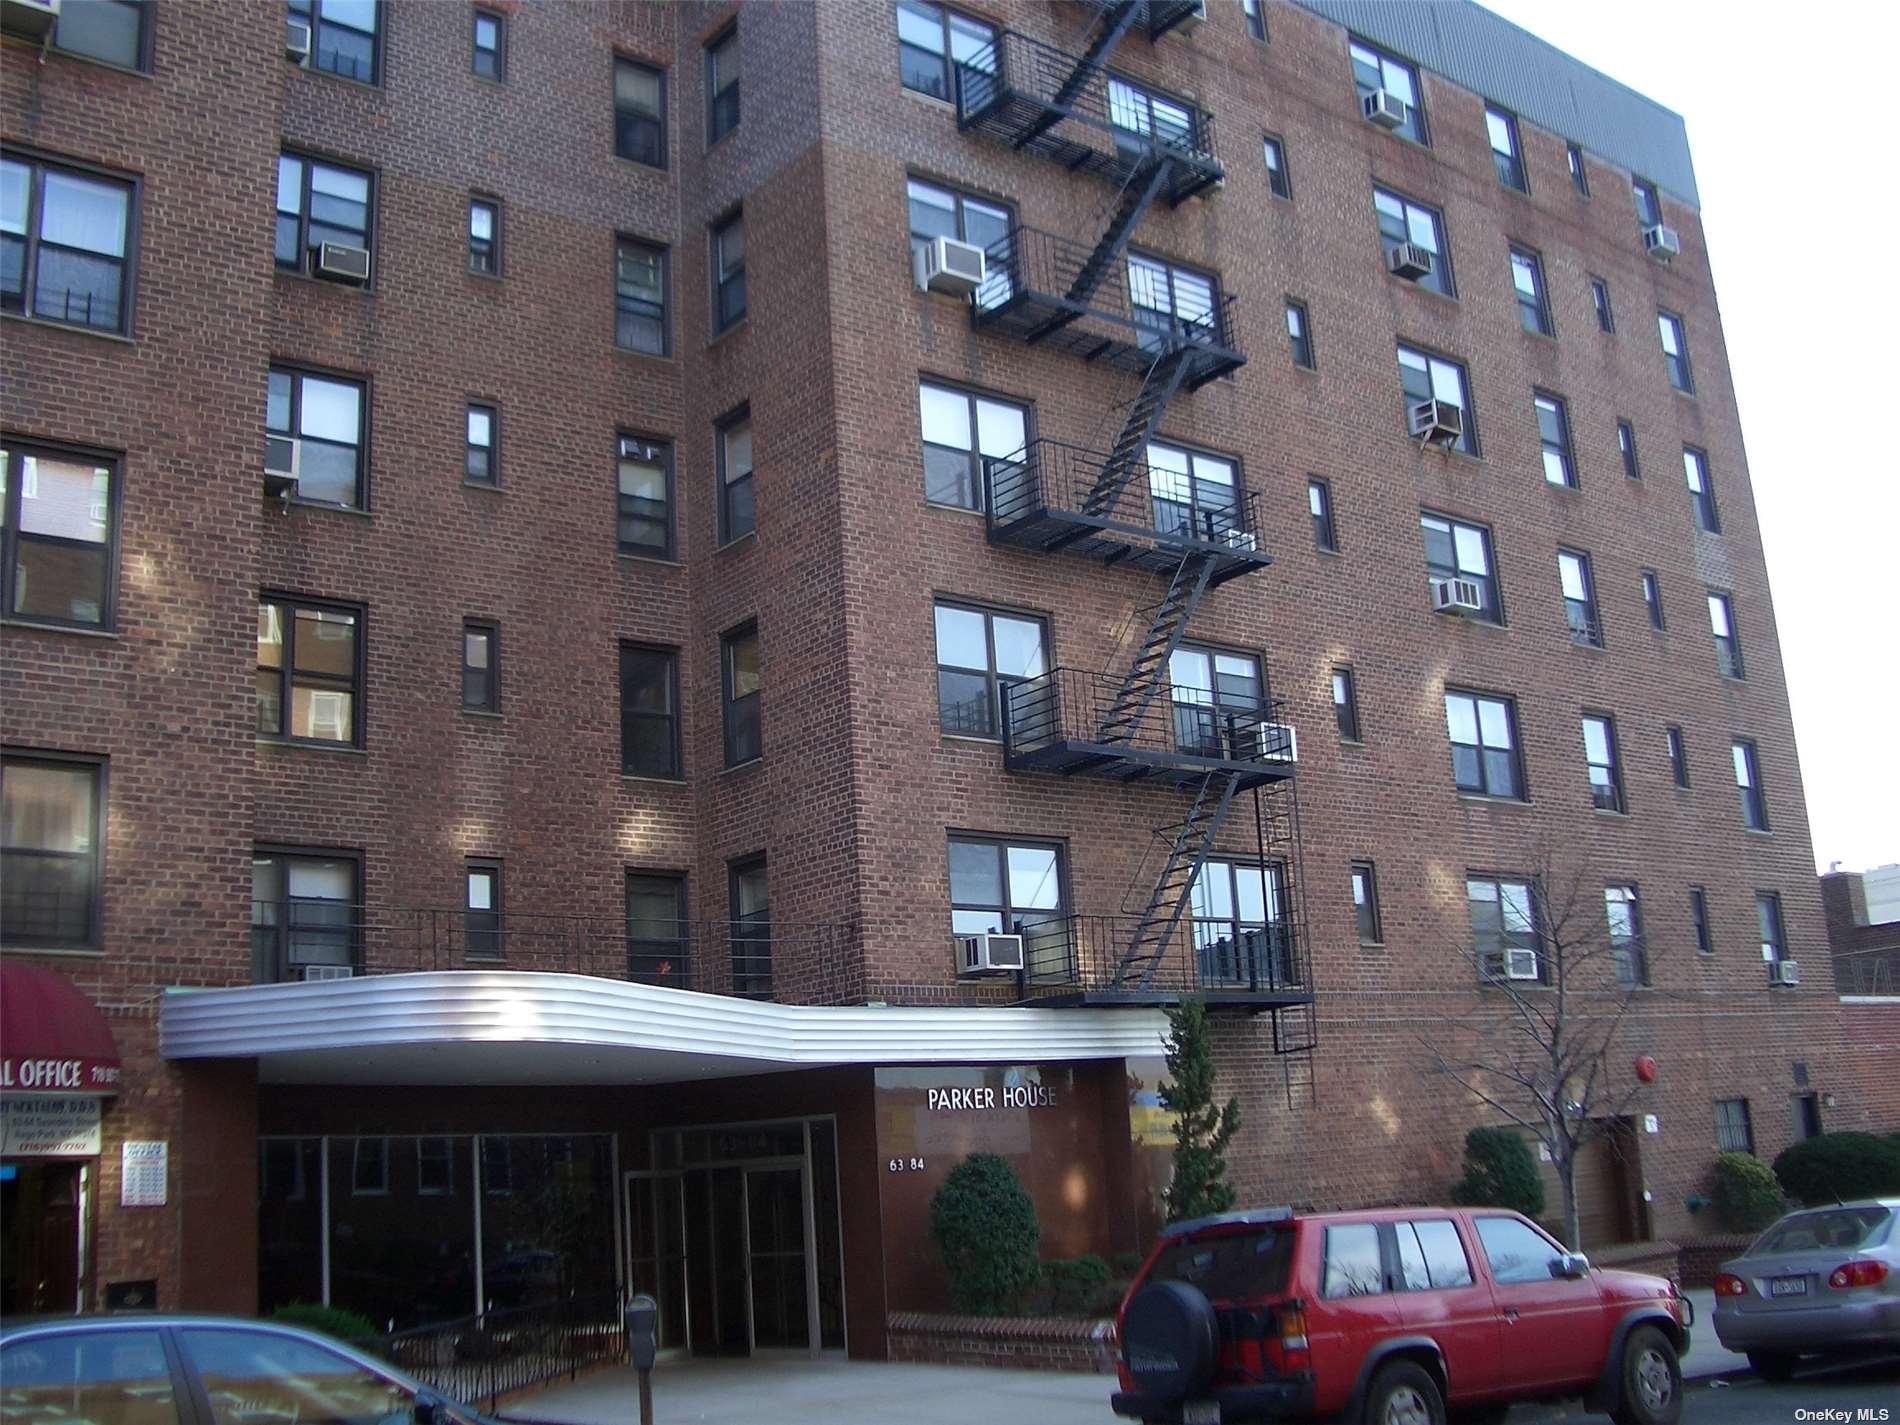 63-84 Saunders Street #2A in Queens, Rego Park, NY 11374